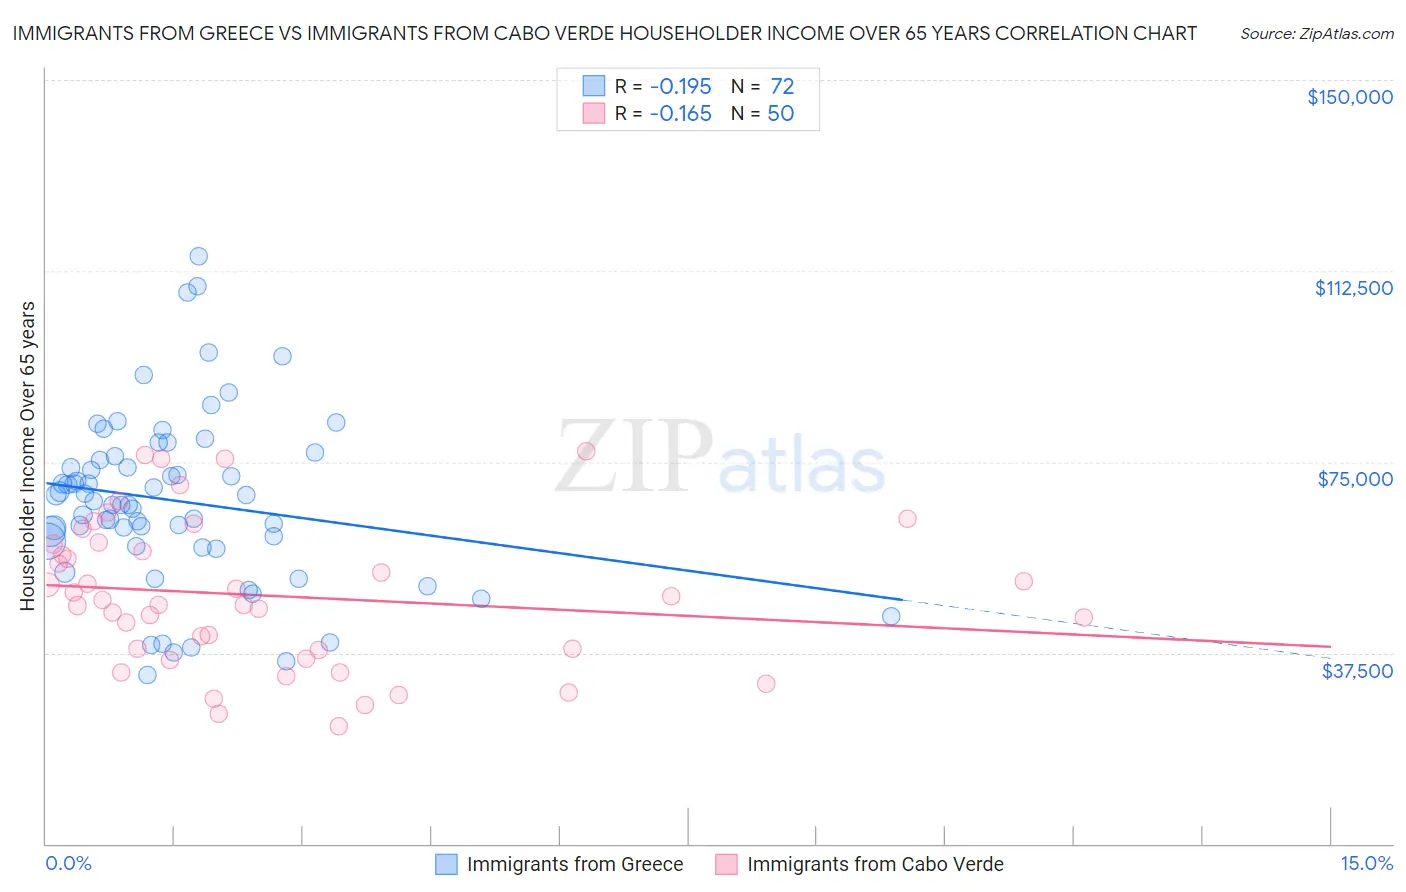 Immigrants from Greece vs Immigrants from Cabo Verde Householder Income Over 65 years